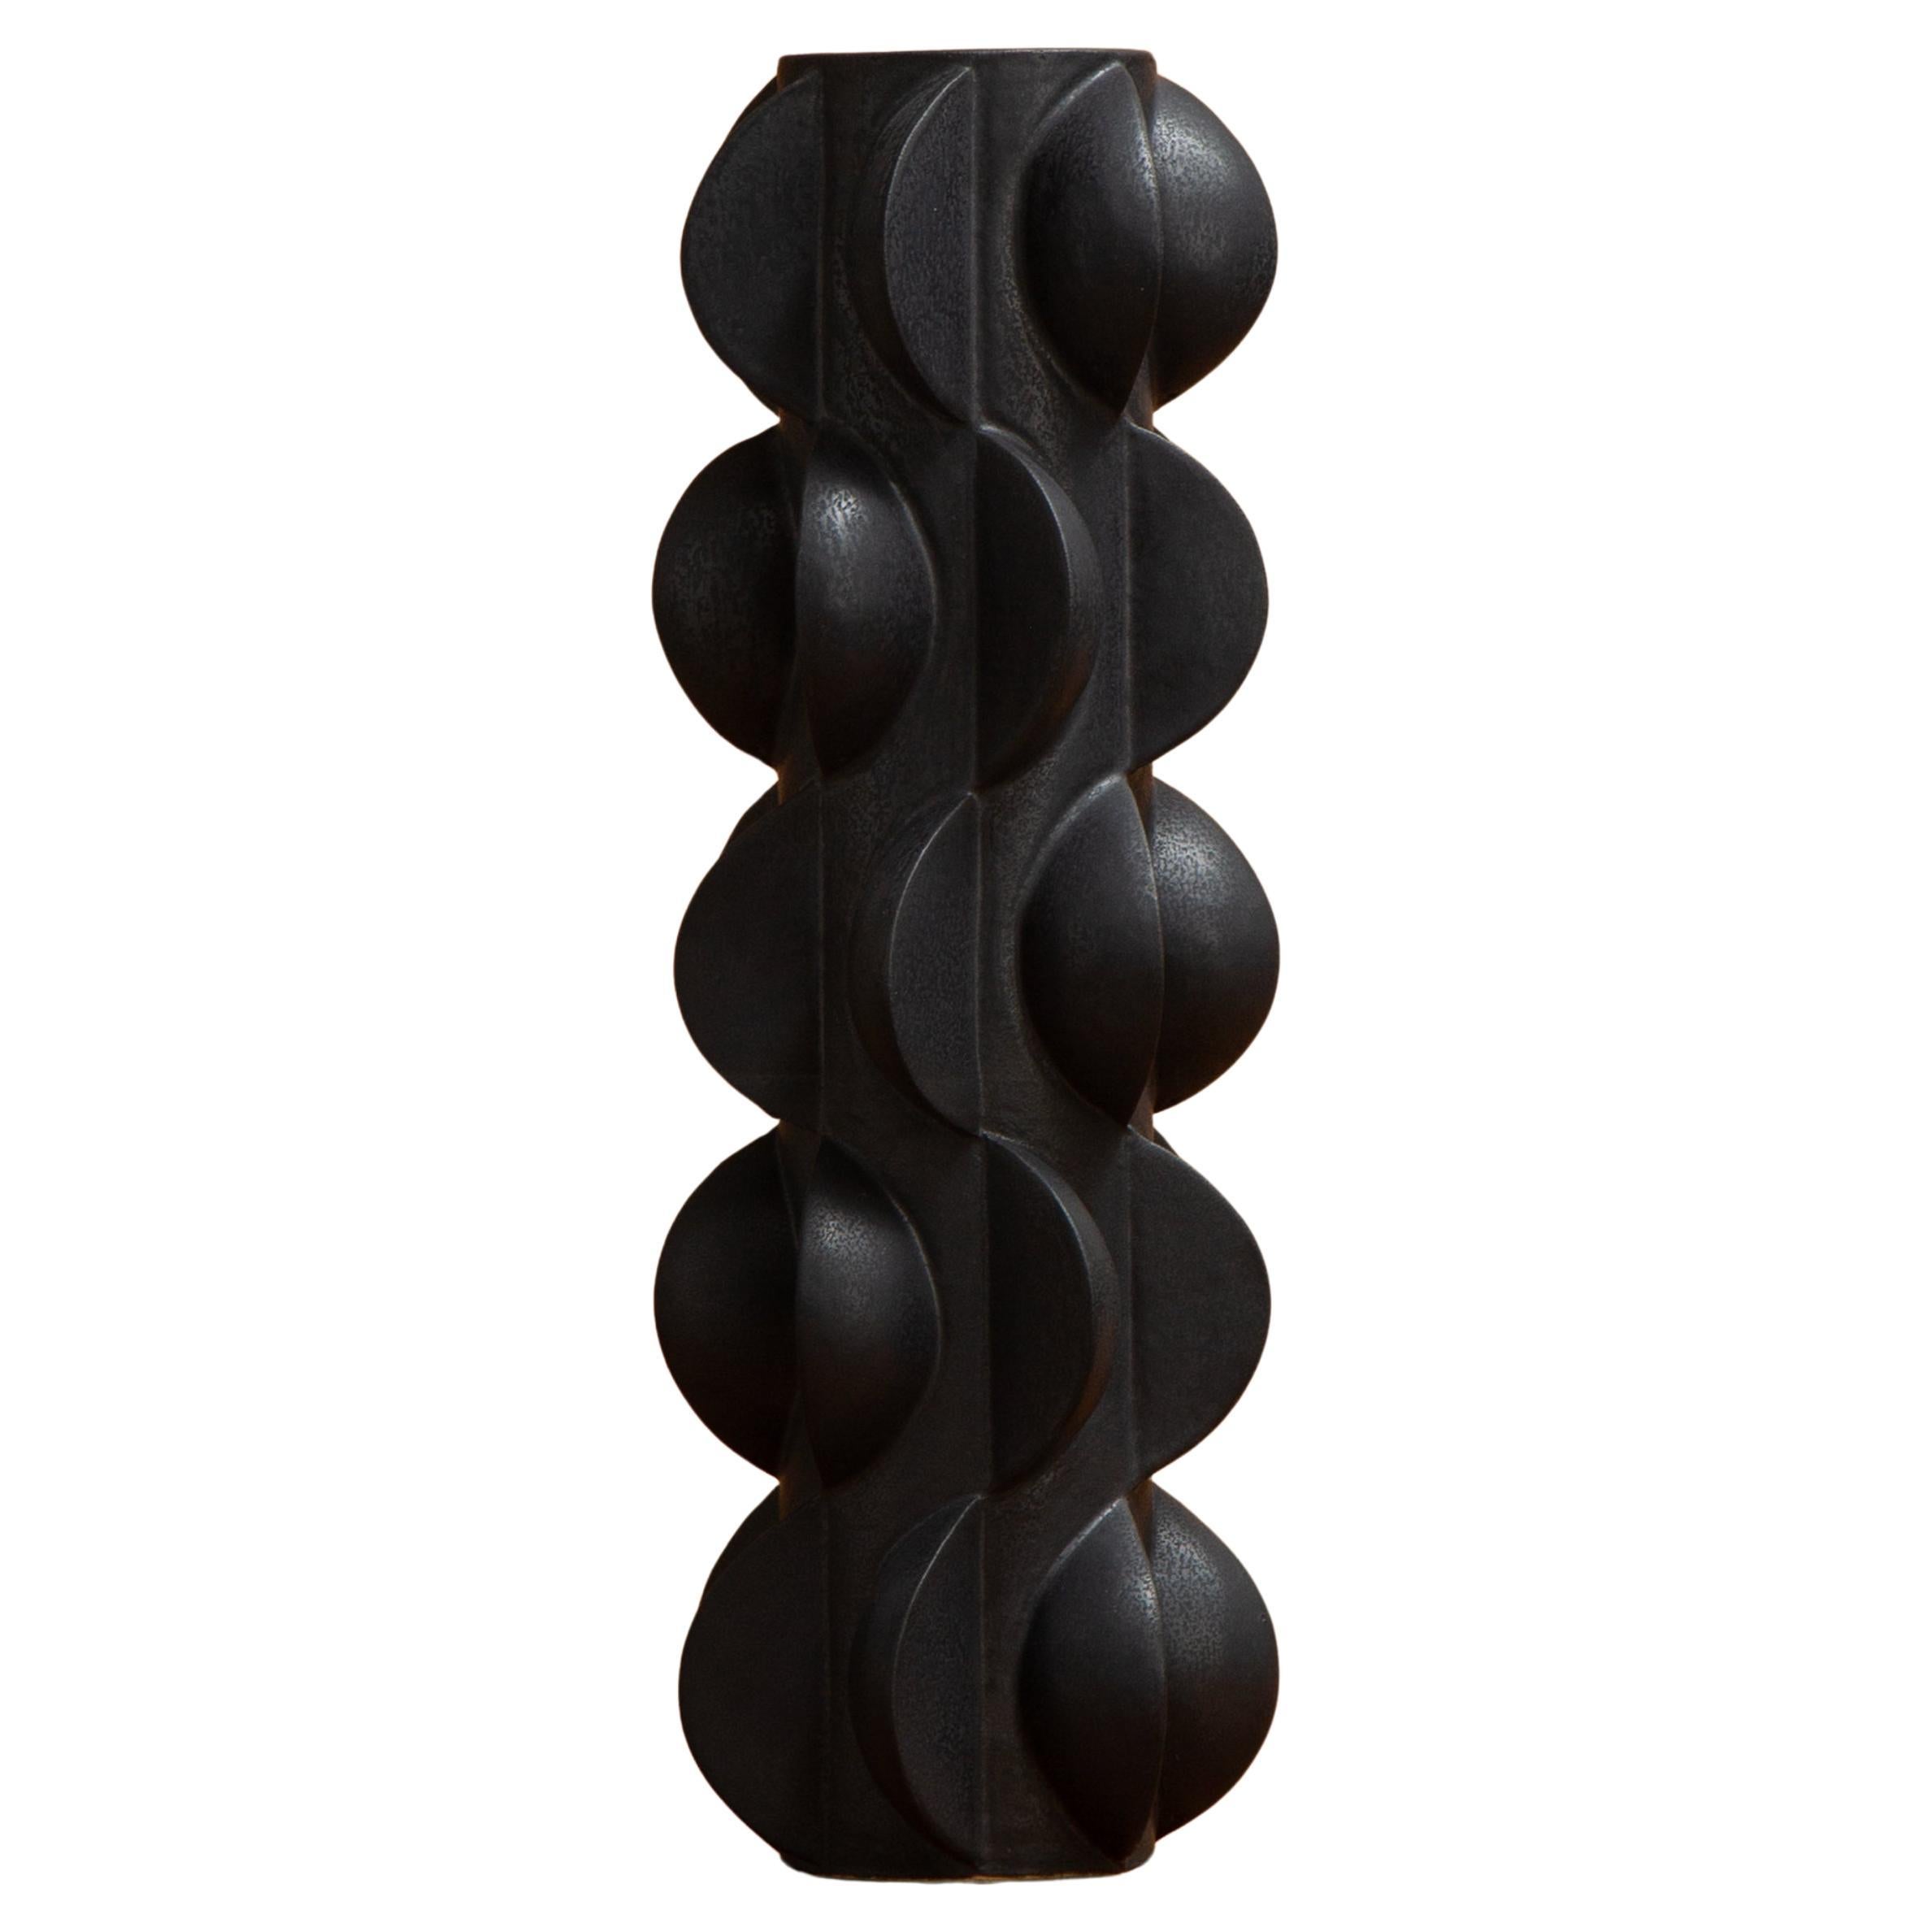 Contemporary, Black Sculptural Vase by Marie Beckman, In Stock